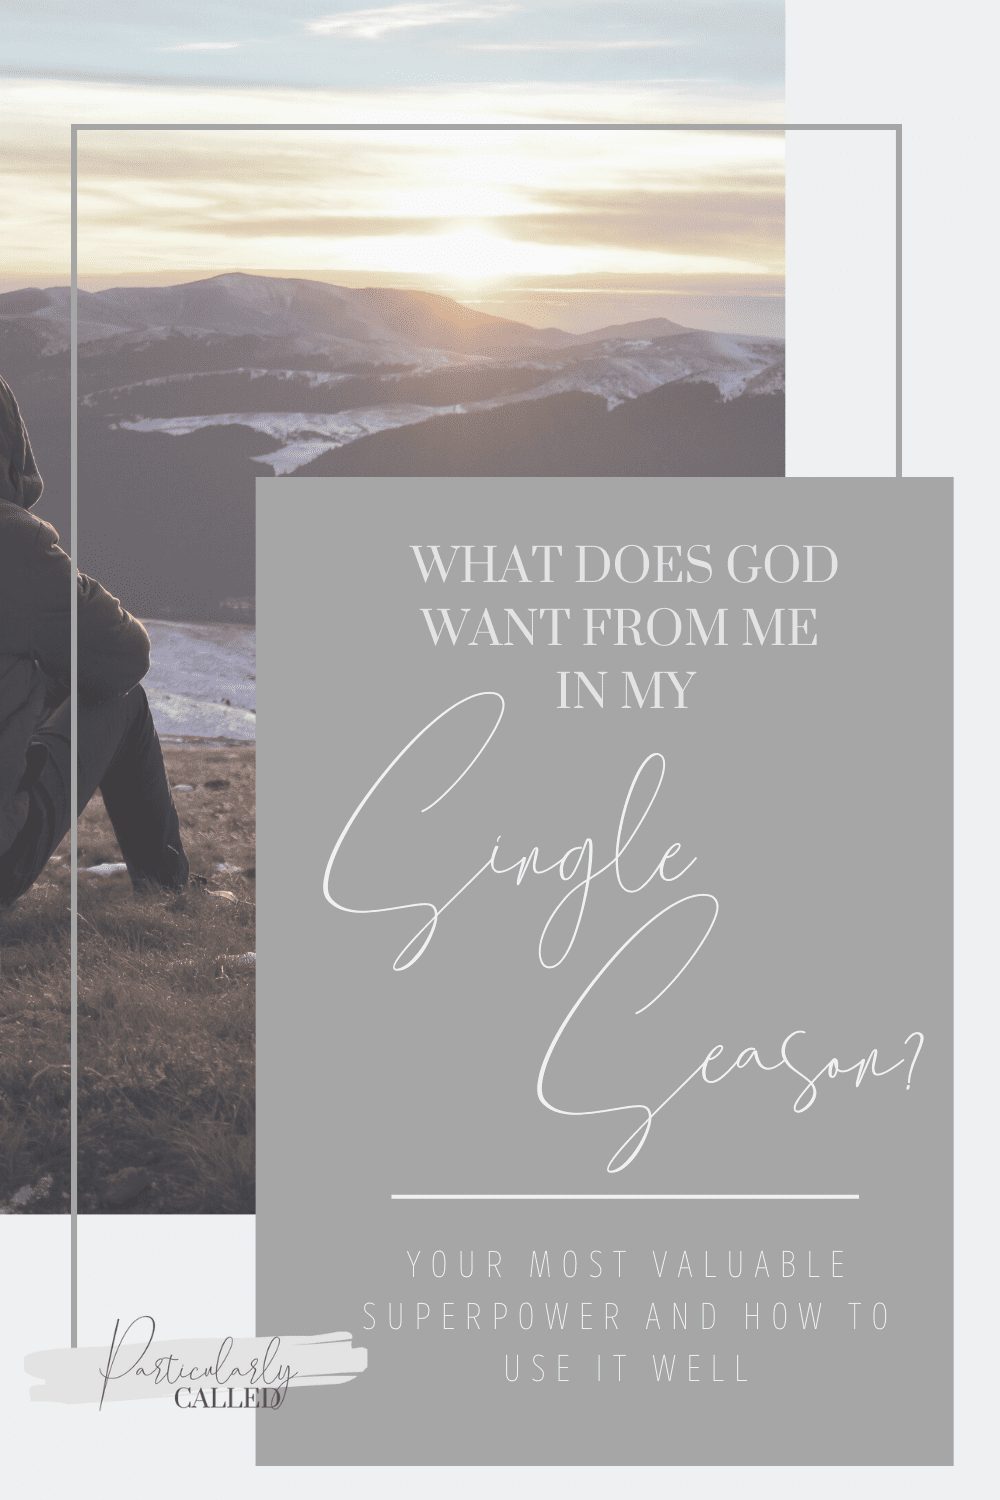 What does God want from You in your Single Season?